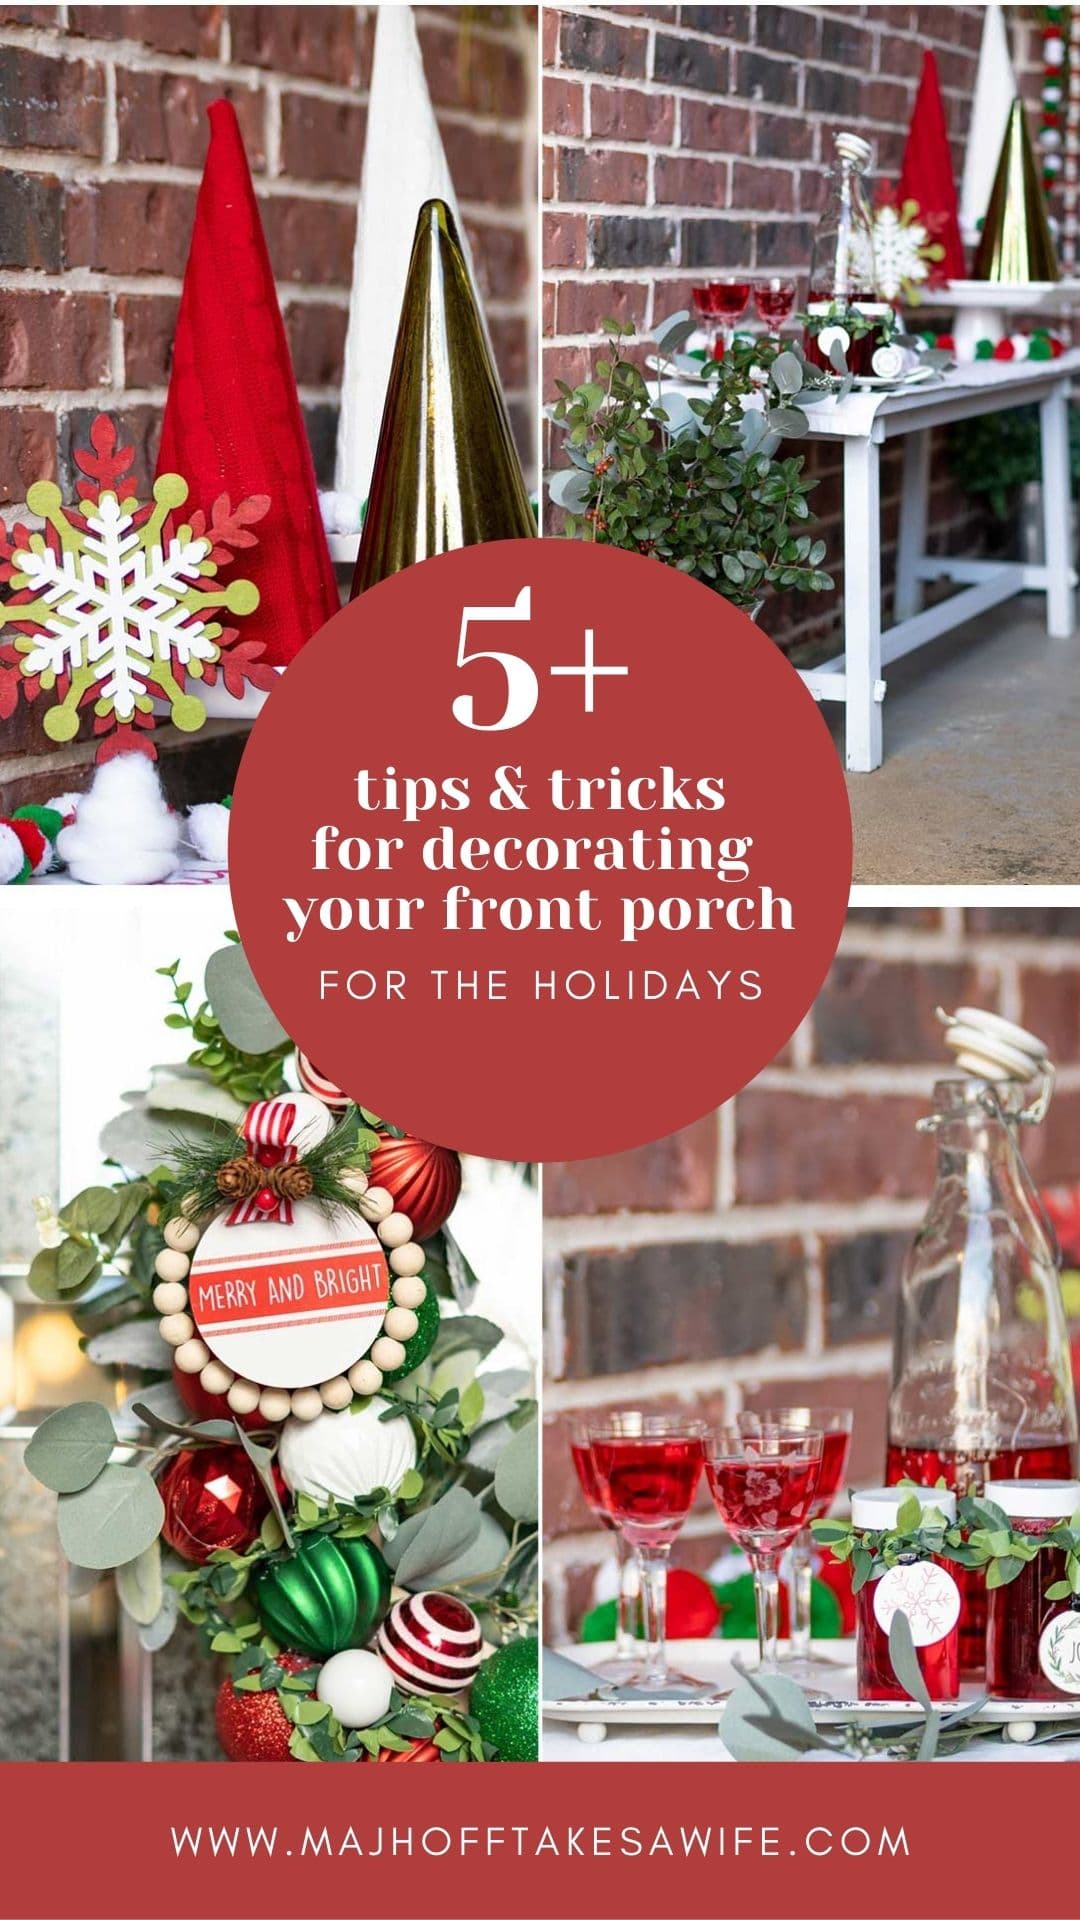 A fun a festive front porch decorated in shades of red, white and green. Features a homemade wreath, pom pom and wooden bead garlands, a homemade Christmas tree sign and a cheery welcome beverage of homemade cranberry vodka! via @mrsmajorhoff